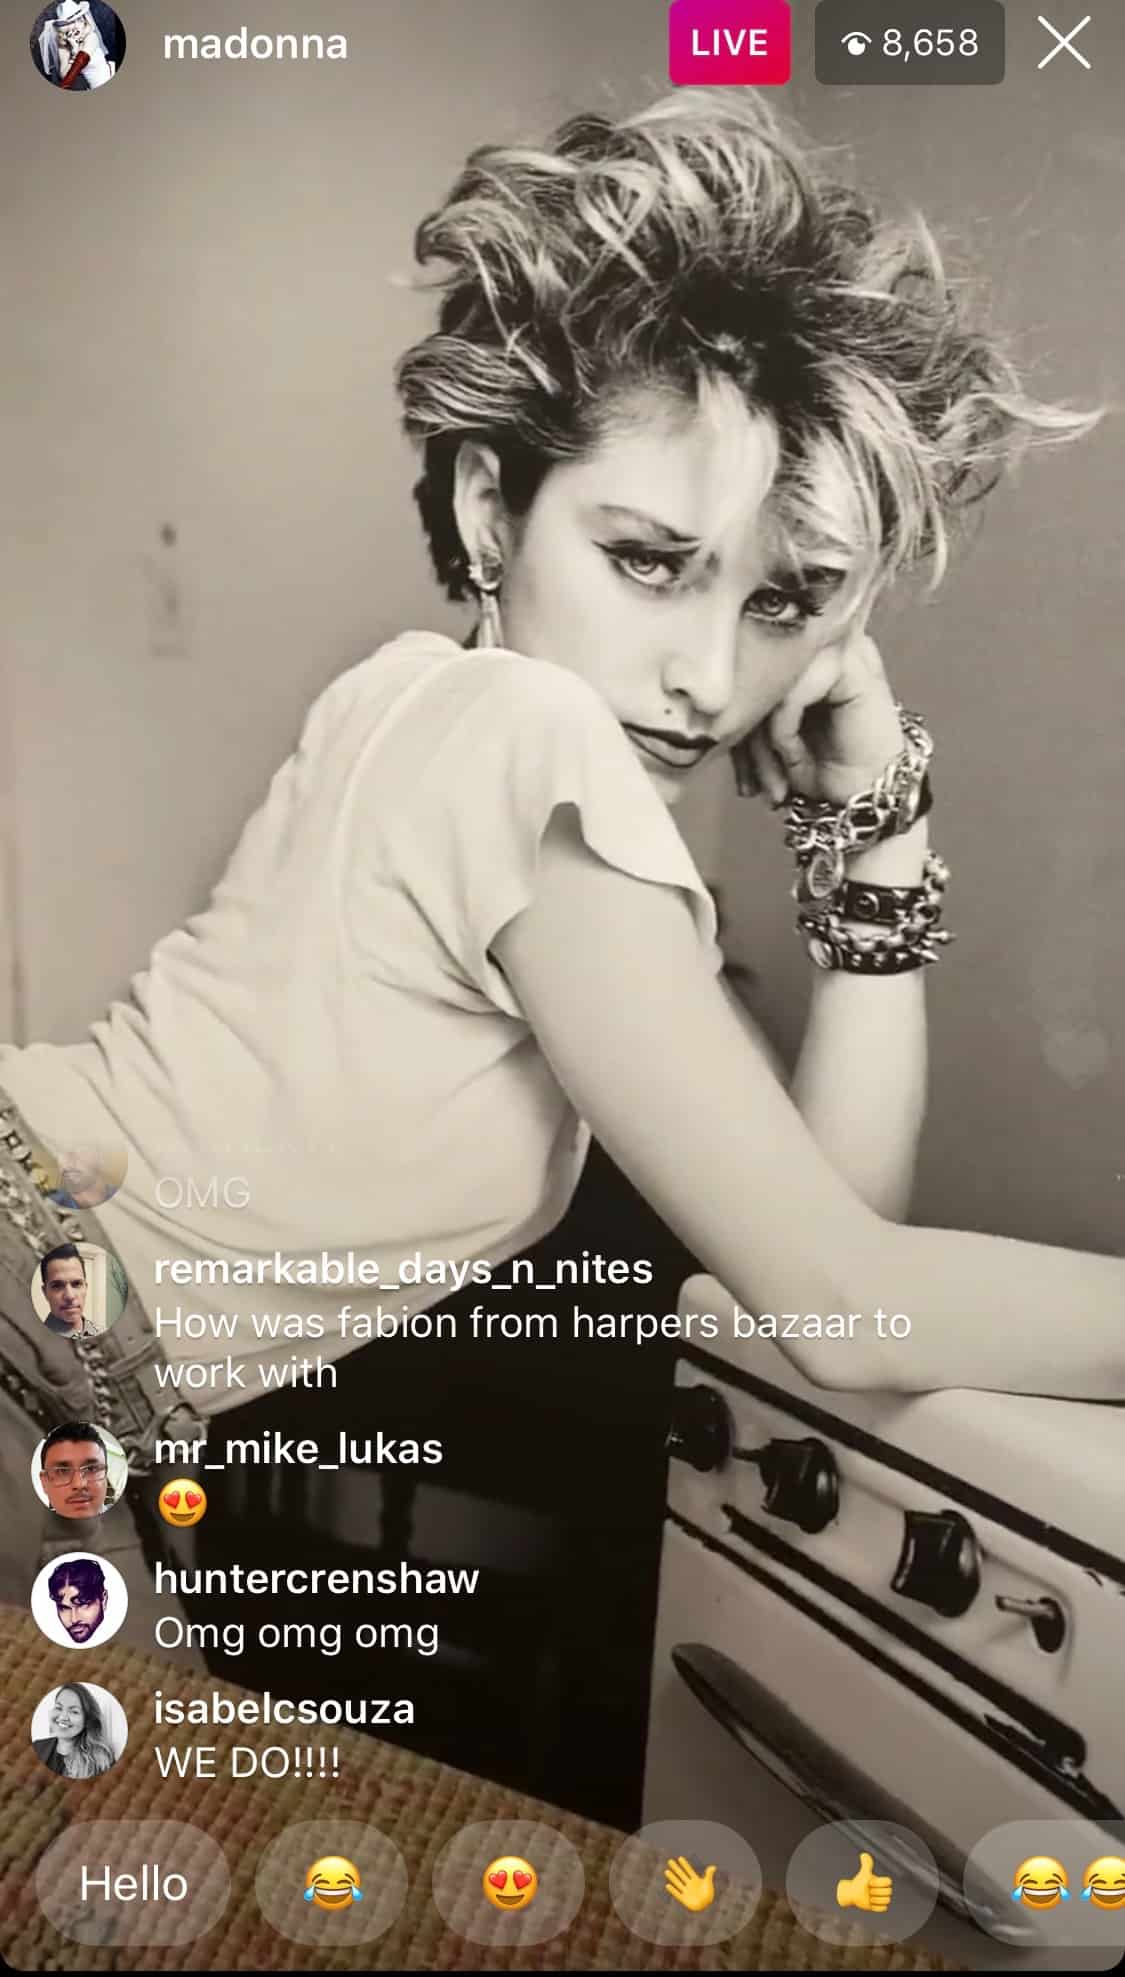 Madonna's Life, Live: An evening on Instagram with the Queen of Pop